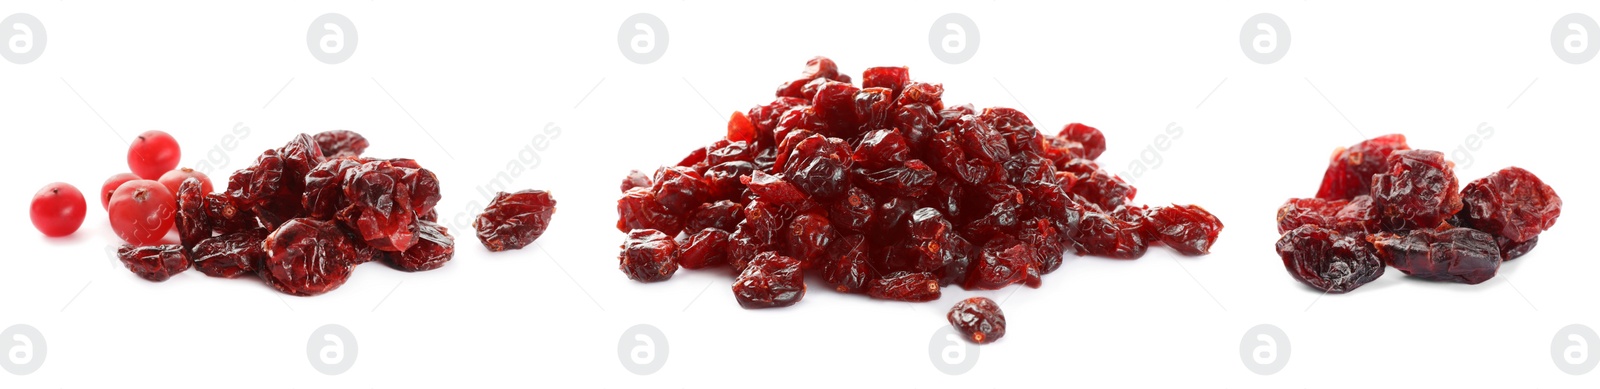 Image of Collage with dried cranberries on white background, banner design